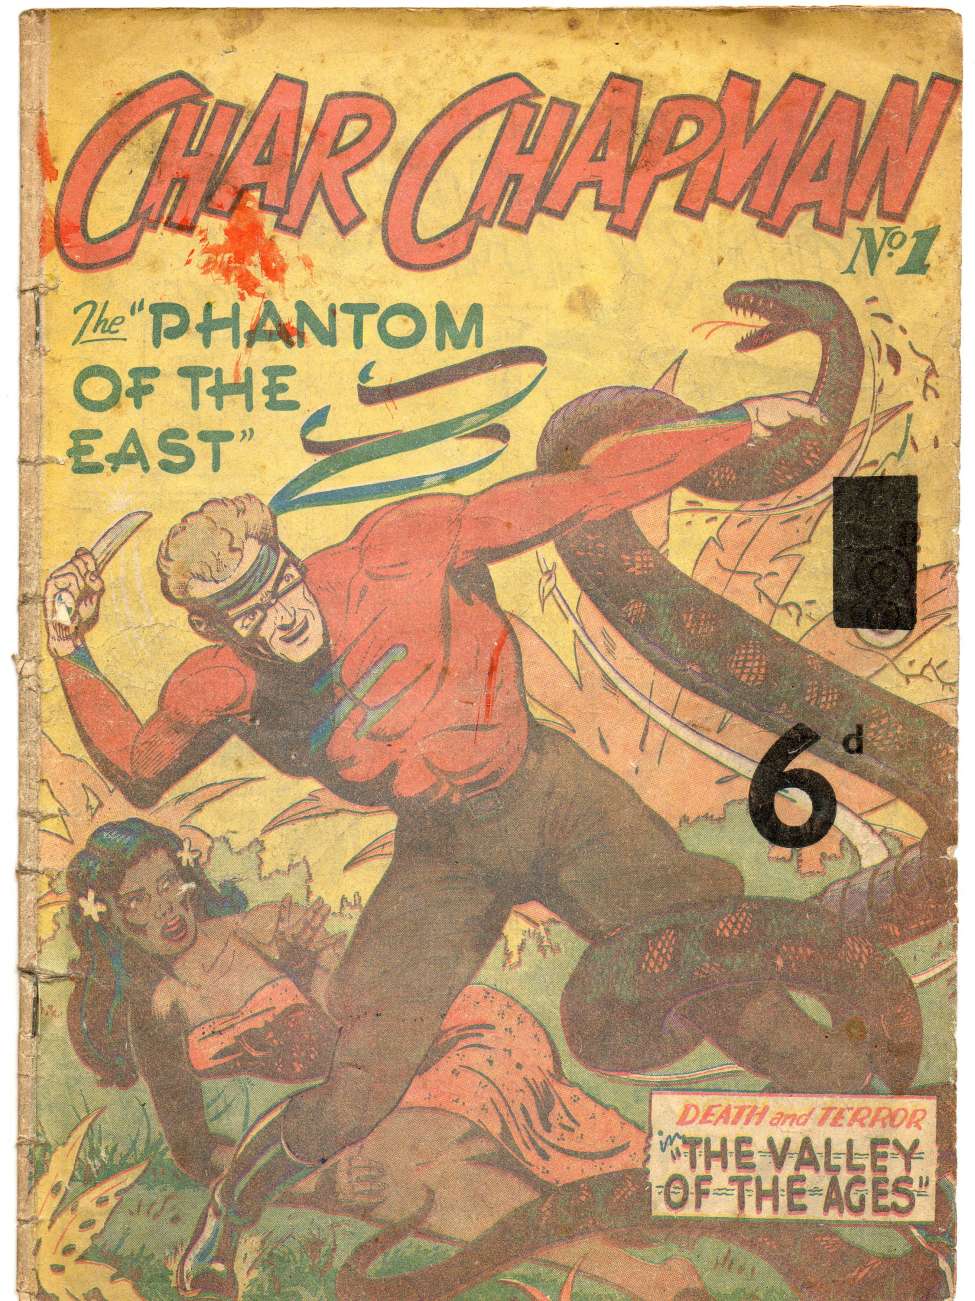 Comic Book Cover For Char Chapman, The Phantom of the East 1